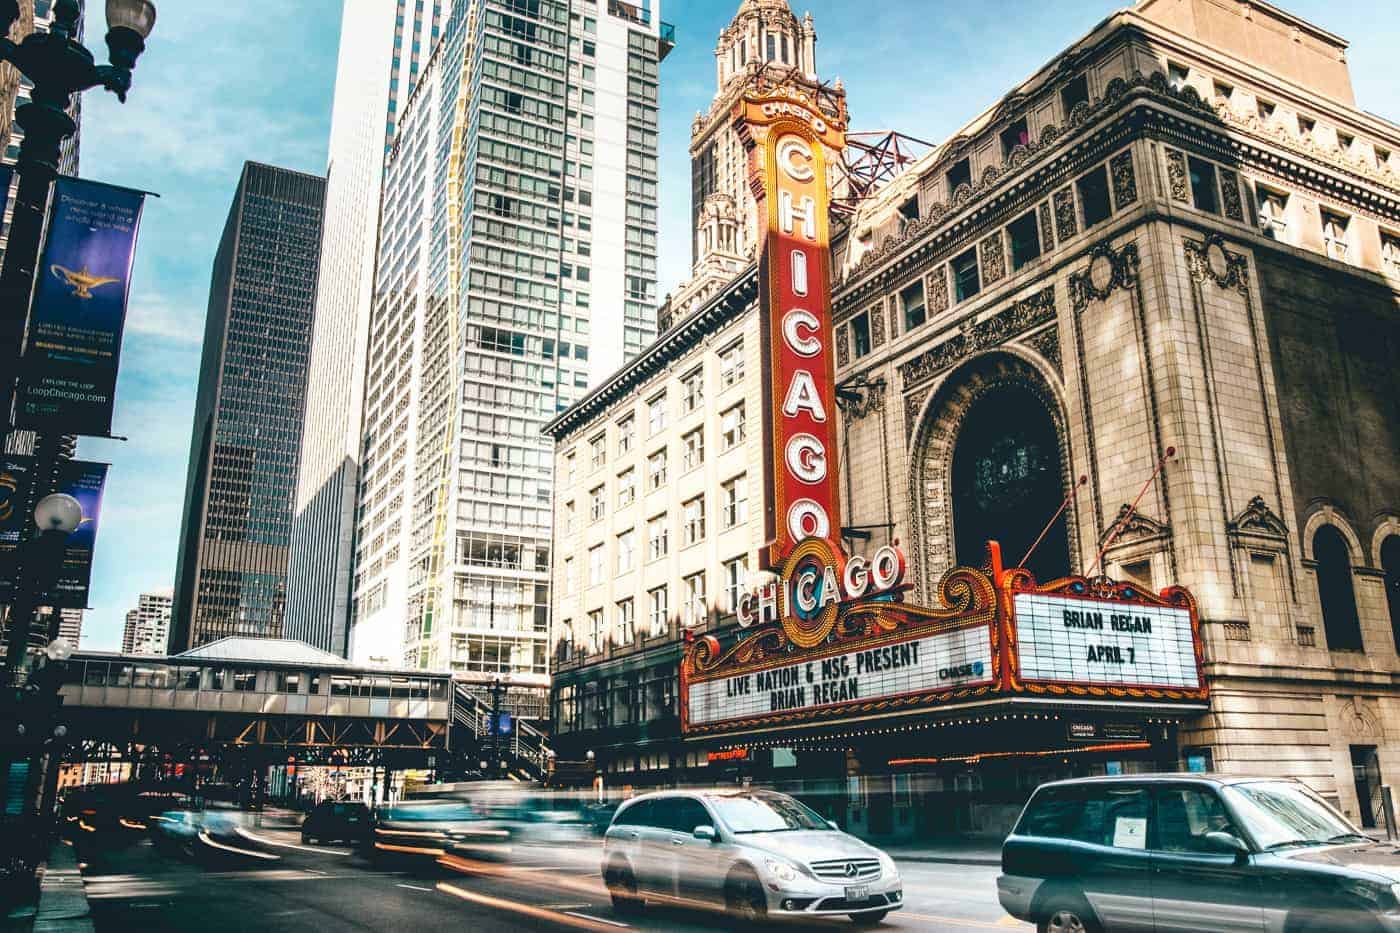 4 Days In Chicago – The Perfect Chicago Itinerary for First-Timers